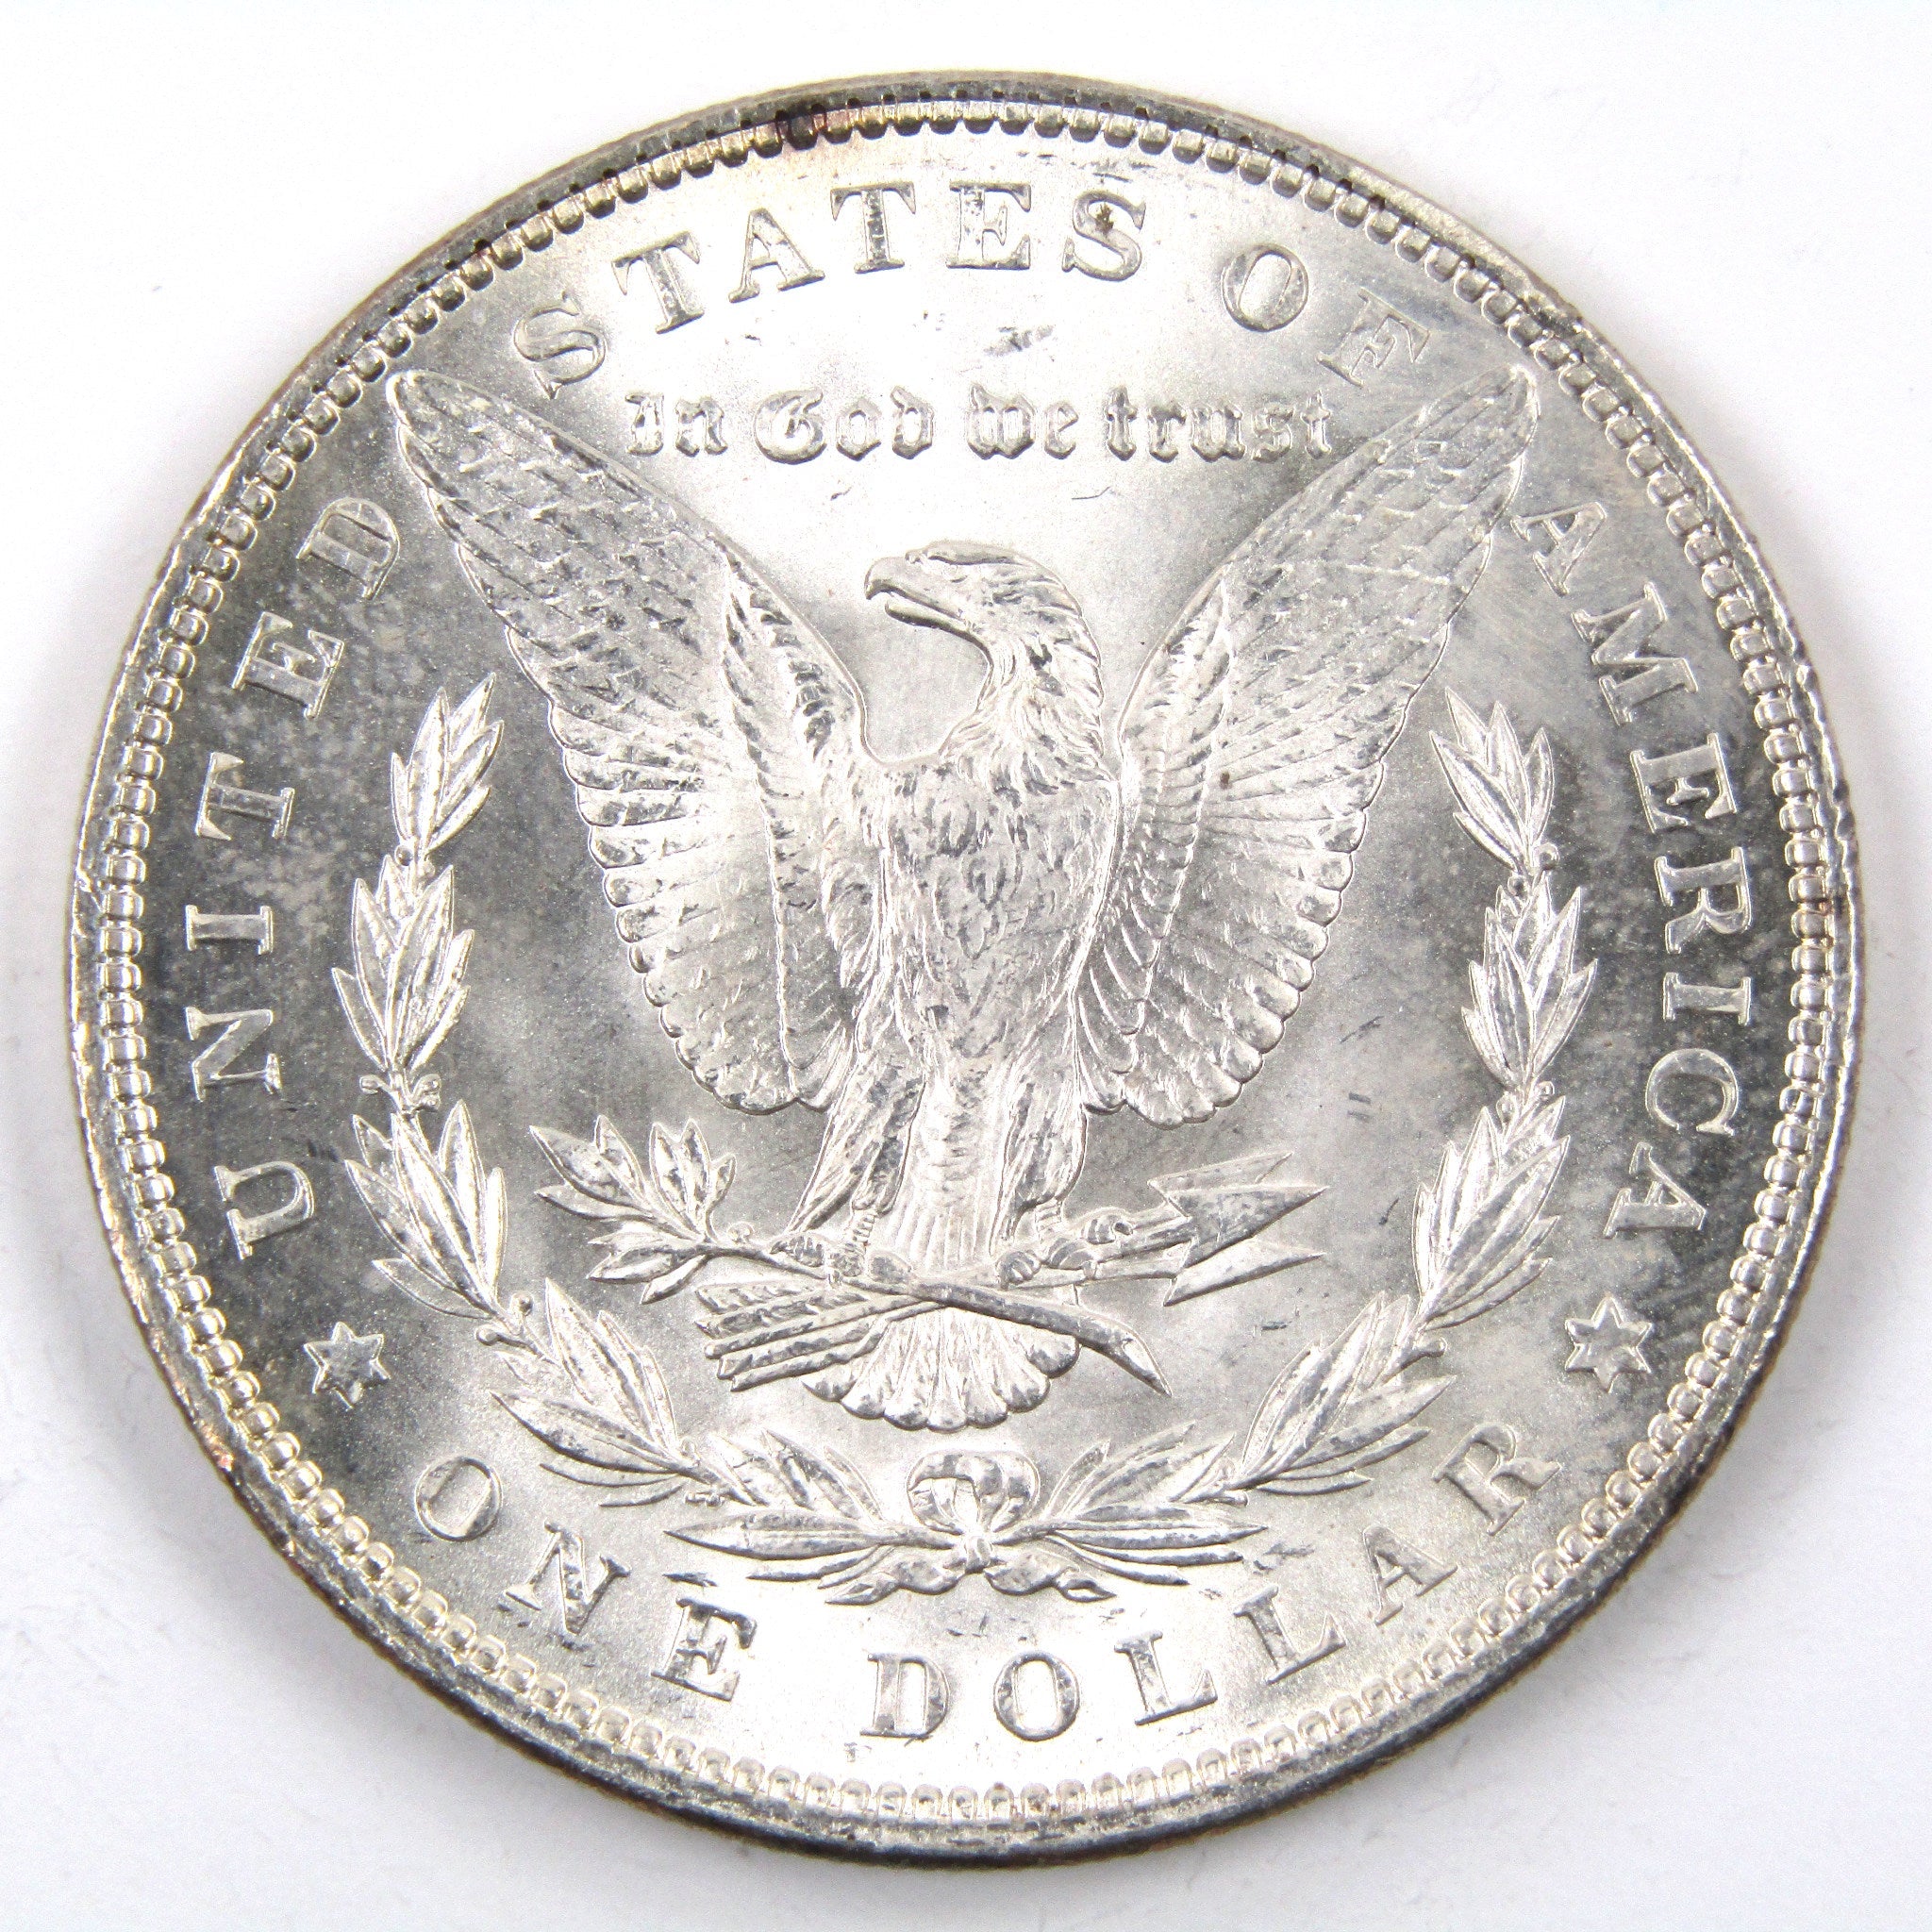 1899 Morgan Dollar BU Uncirculated Mint State 90% Silver SKU:CPC1711 - Morgan coin - Morgan silver dollar - Morgan silver dollar for sale - Profile Coins &amp; Collectibles